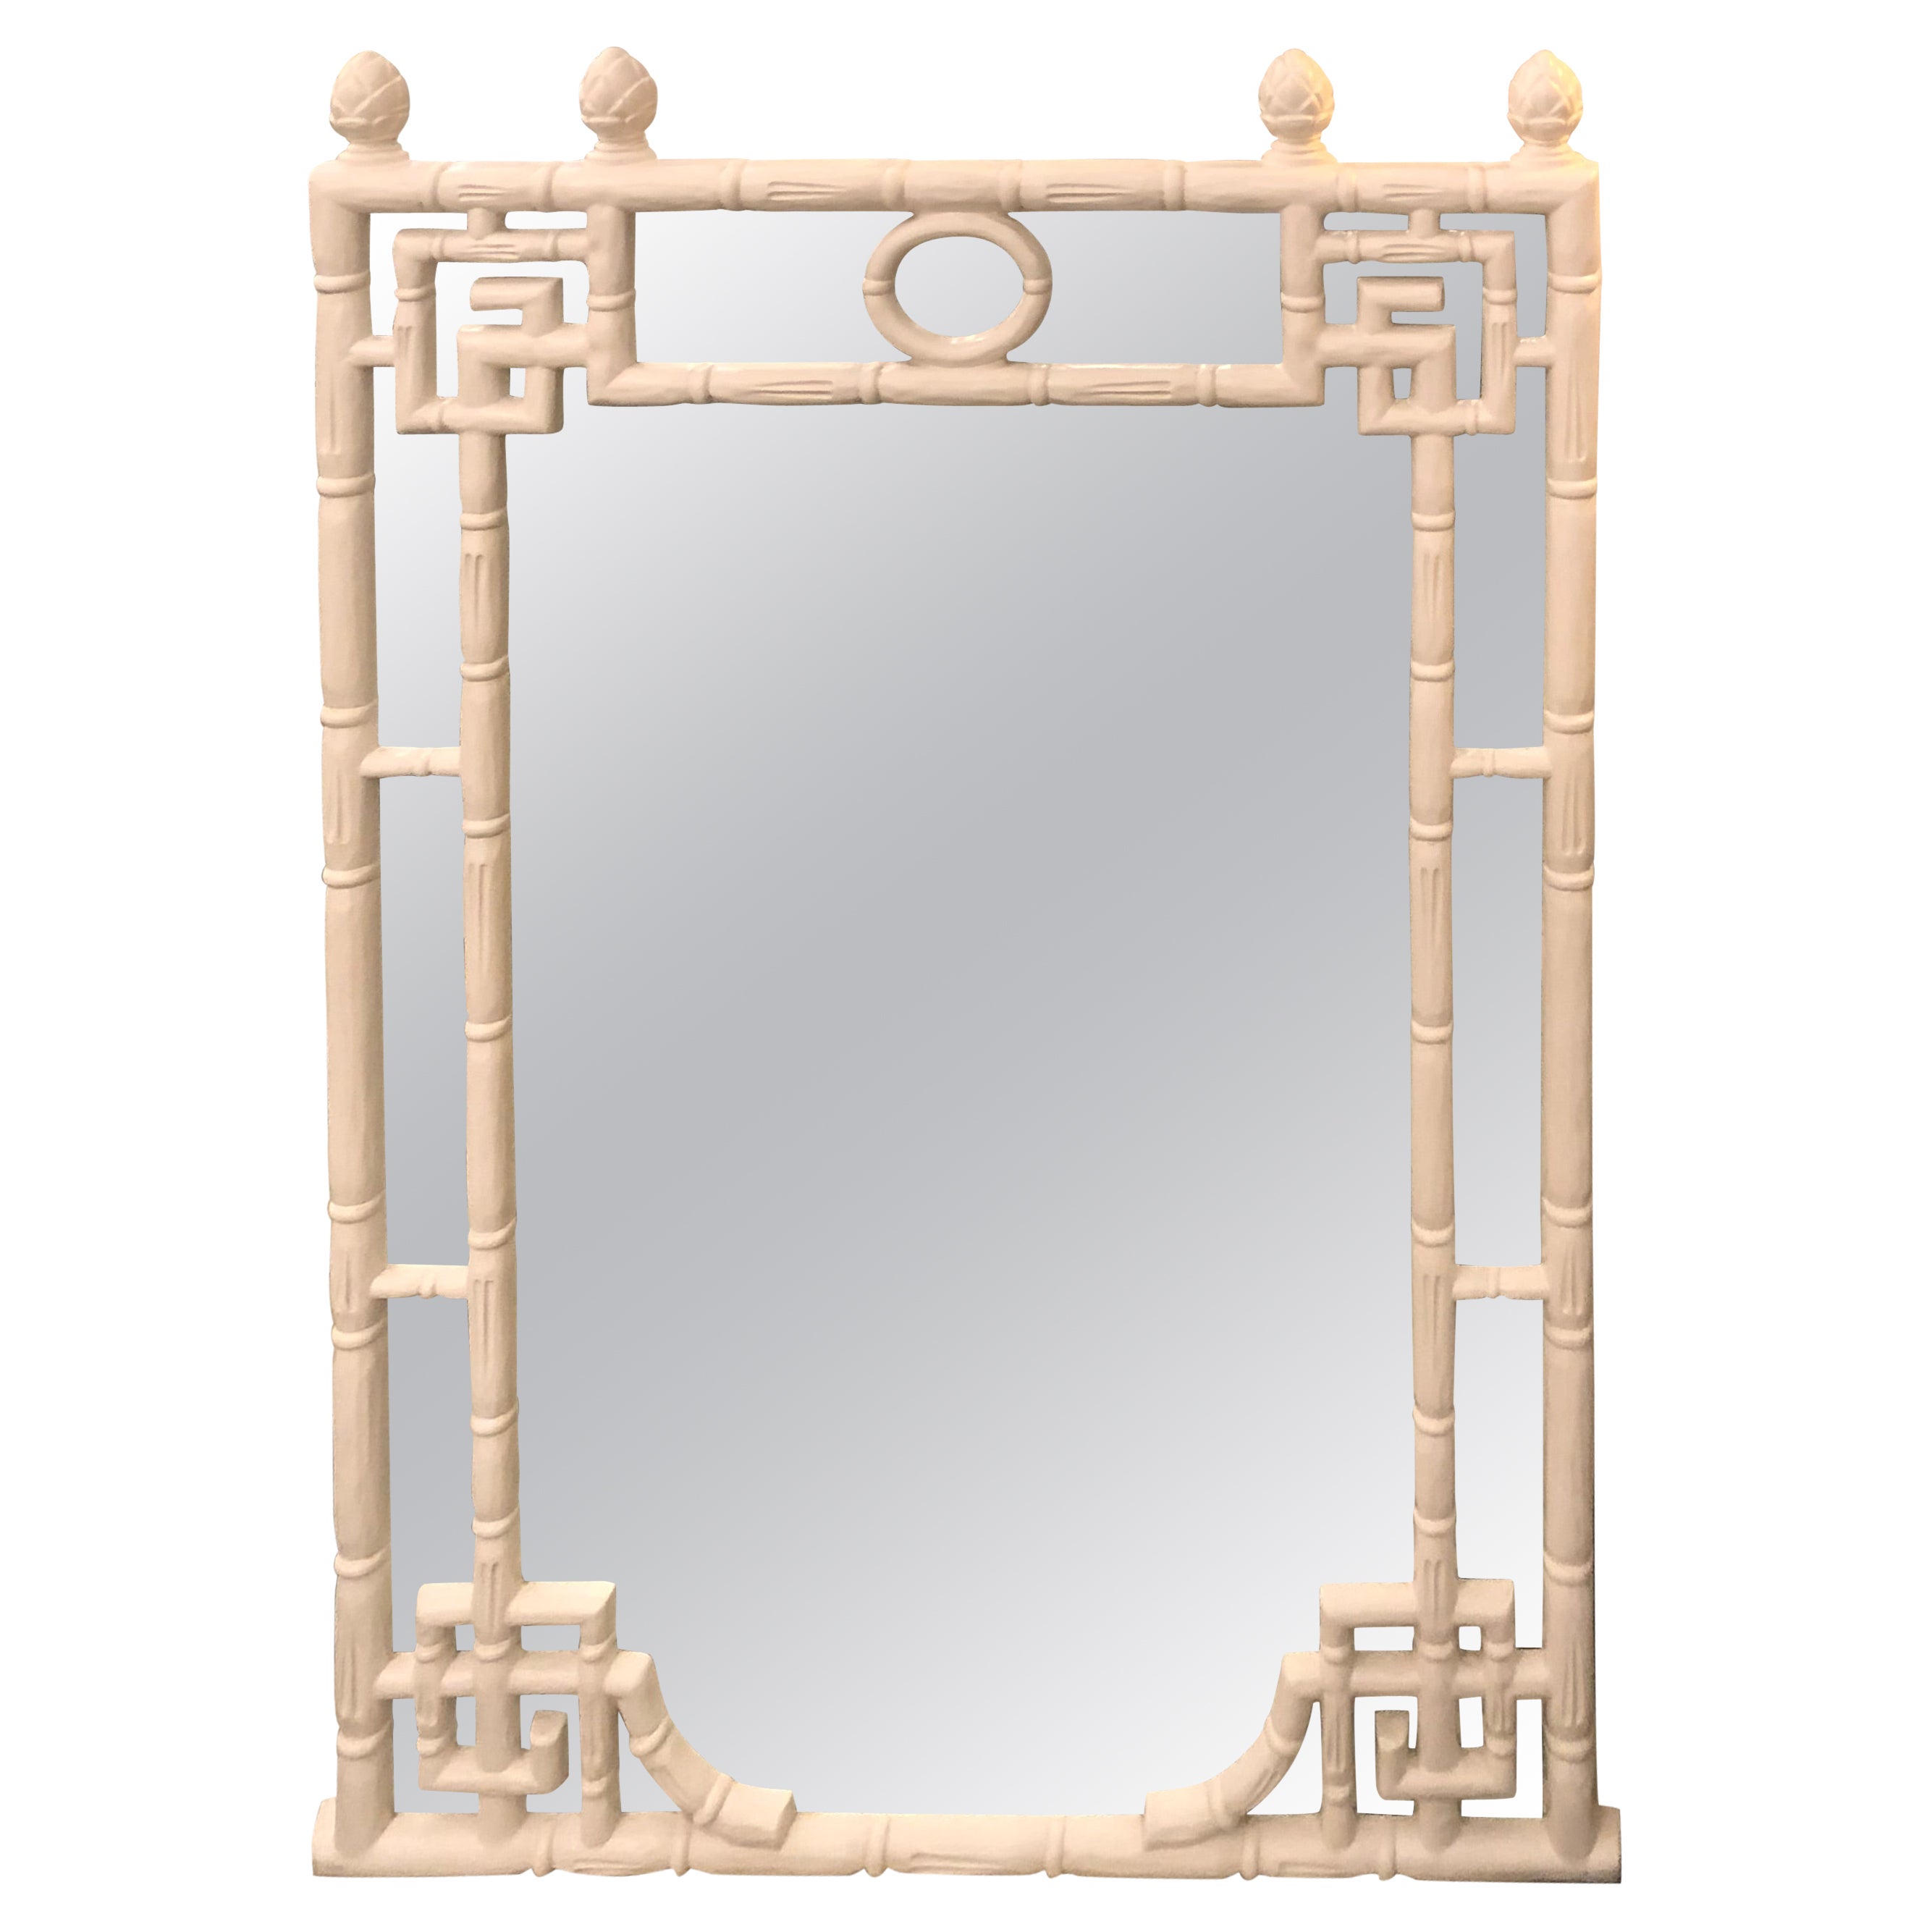 Stylish Hollywood Regency Vintage White Faux Bamboo Mirror by Turner